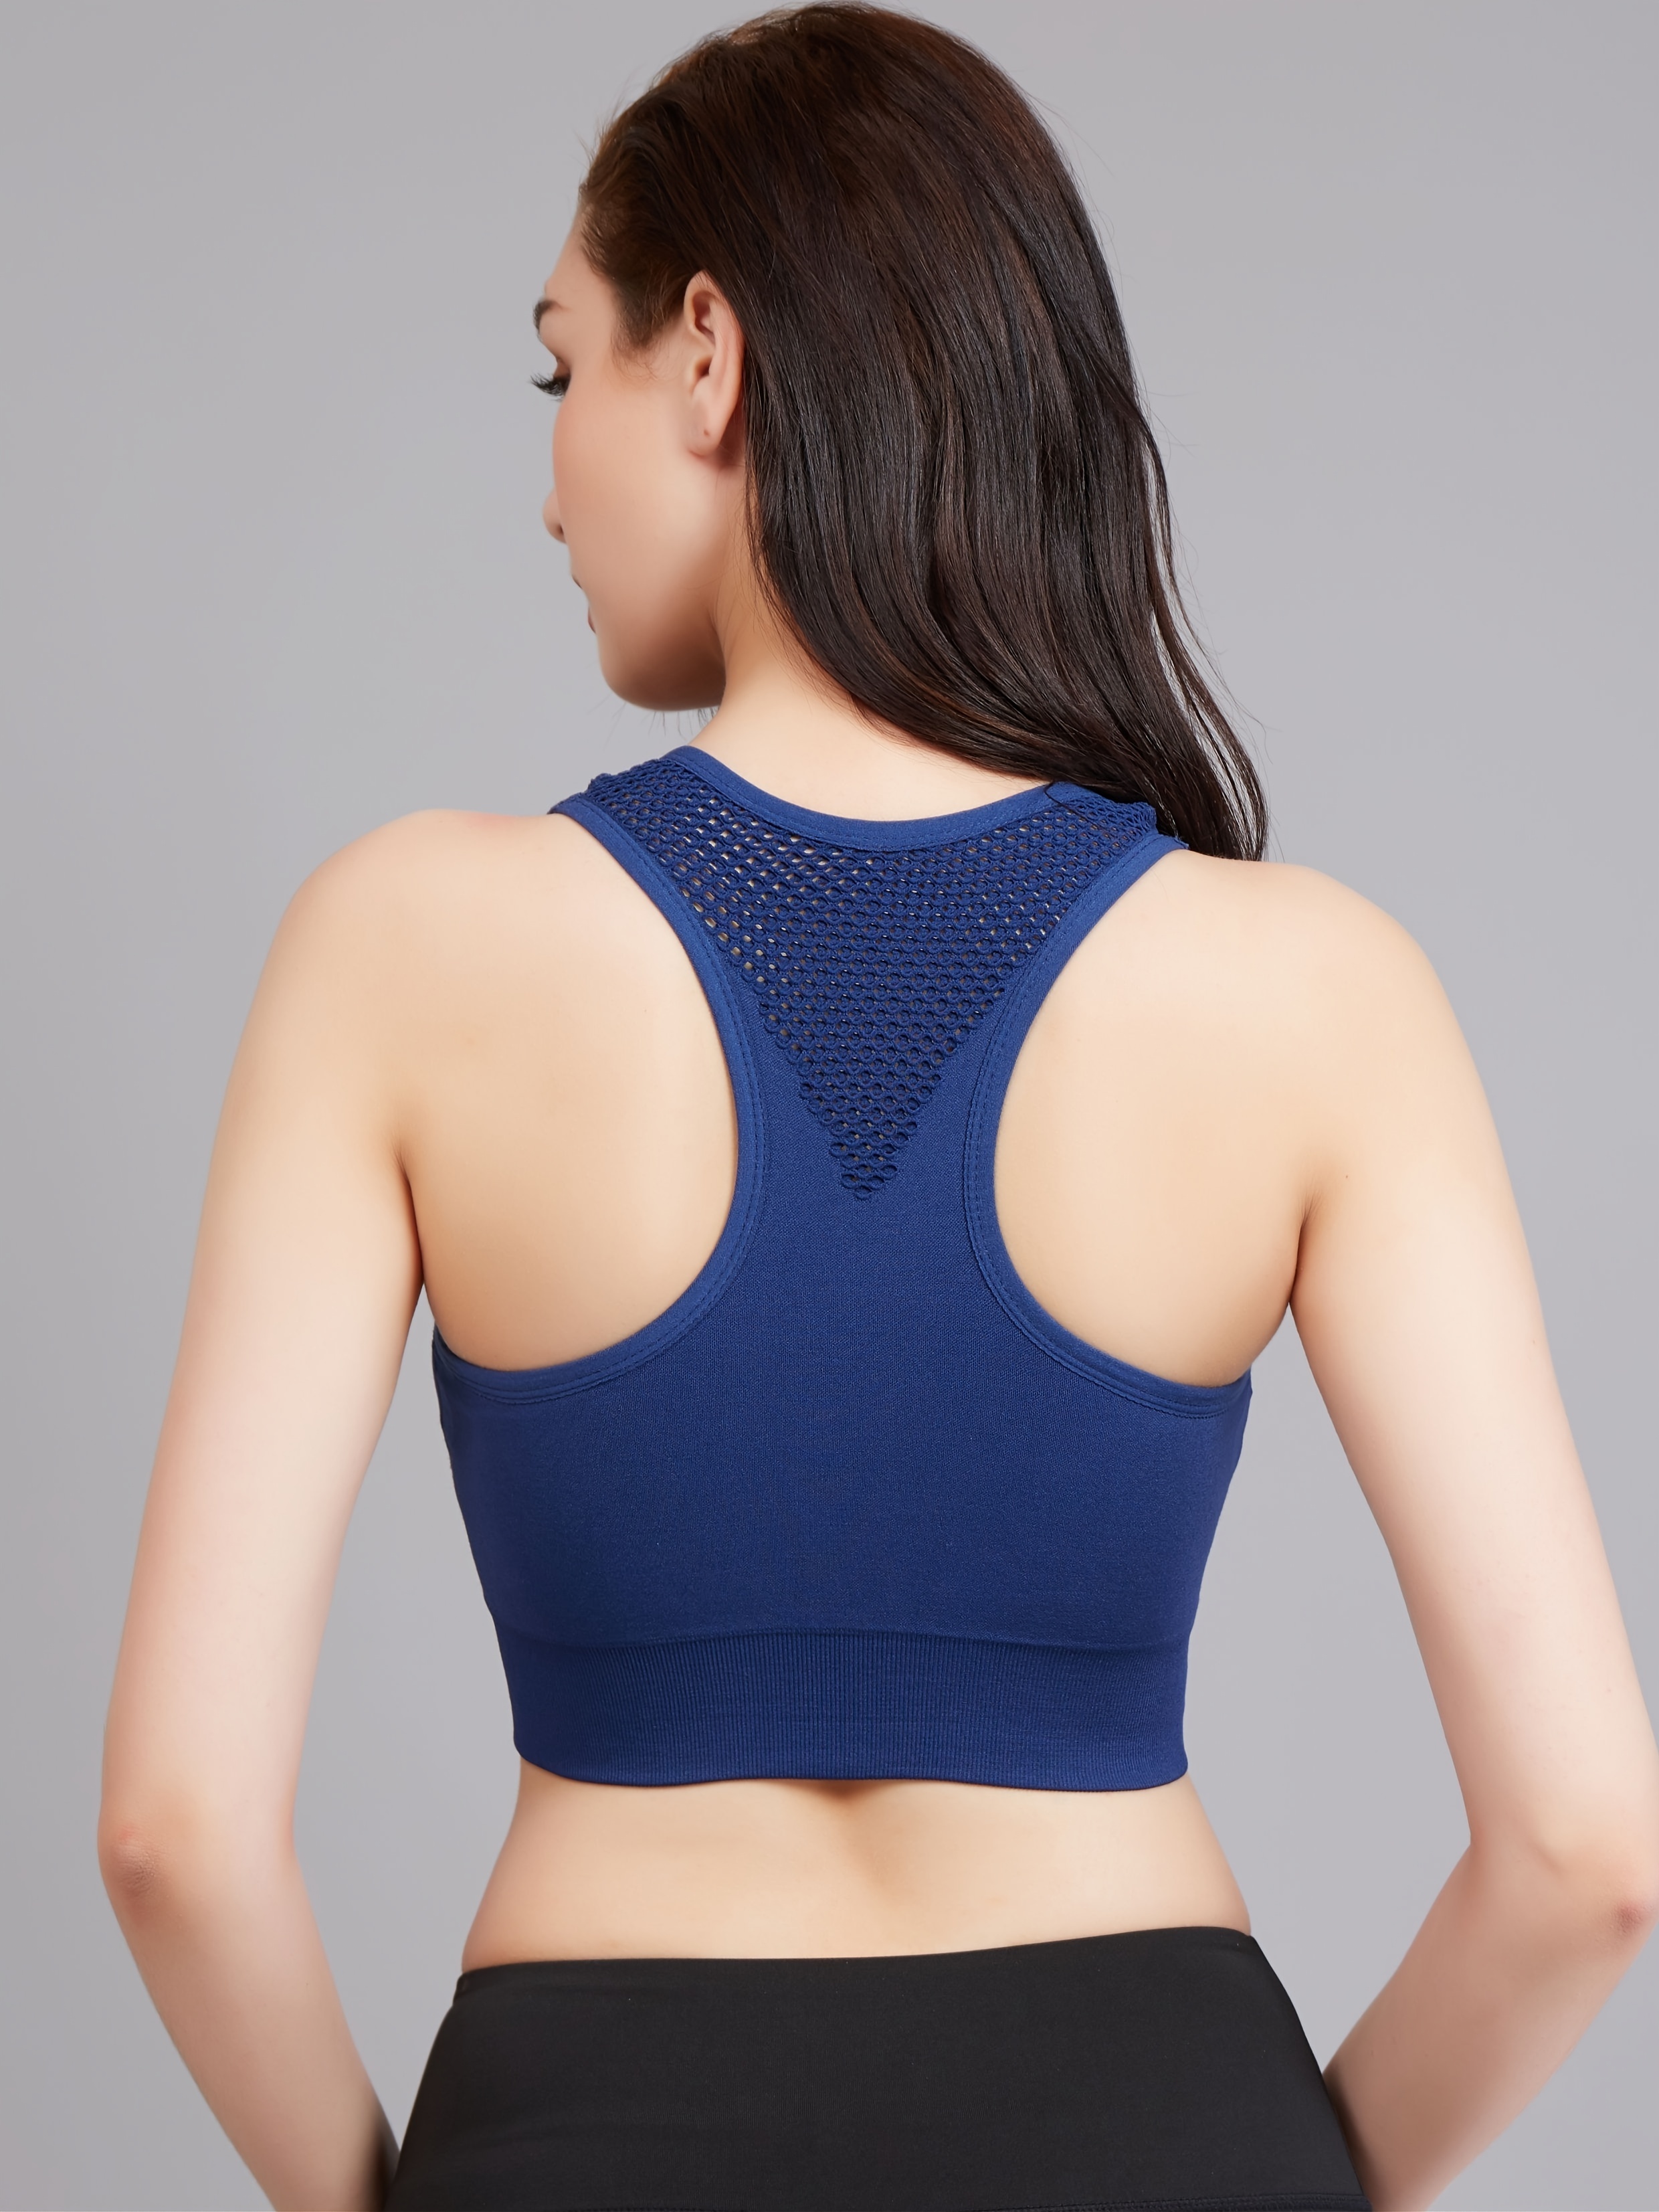 Hioffer High Impact Zippered Sports Bra Removable Padded Yoga Vest Blue at   Women's Clothing store